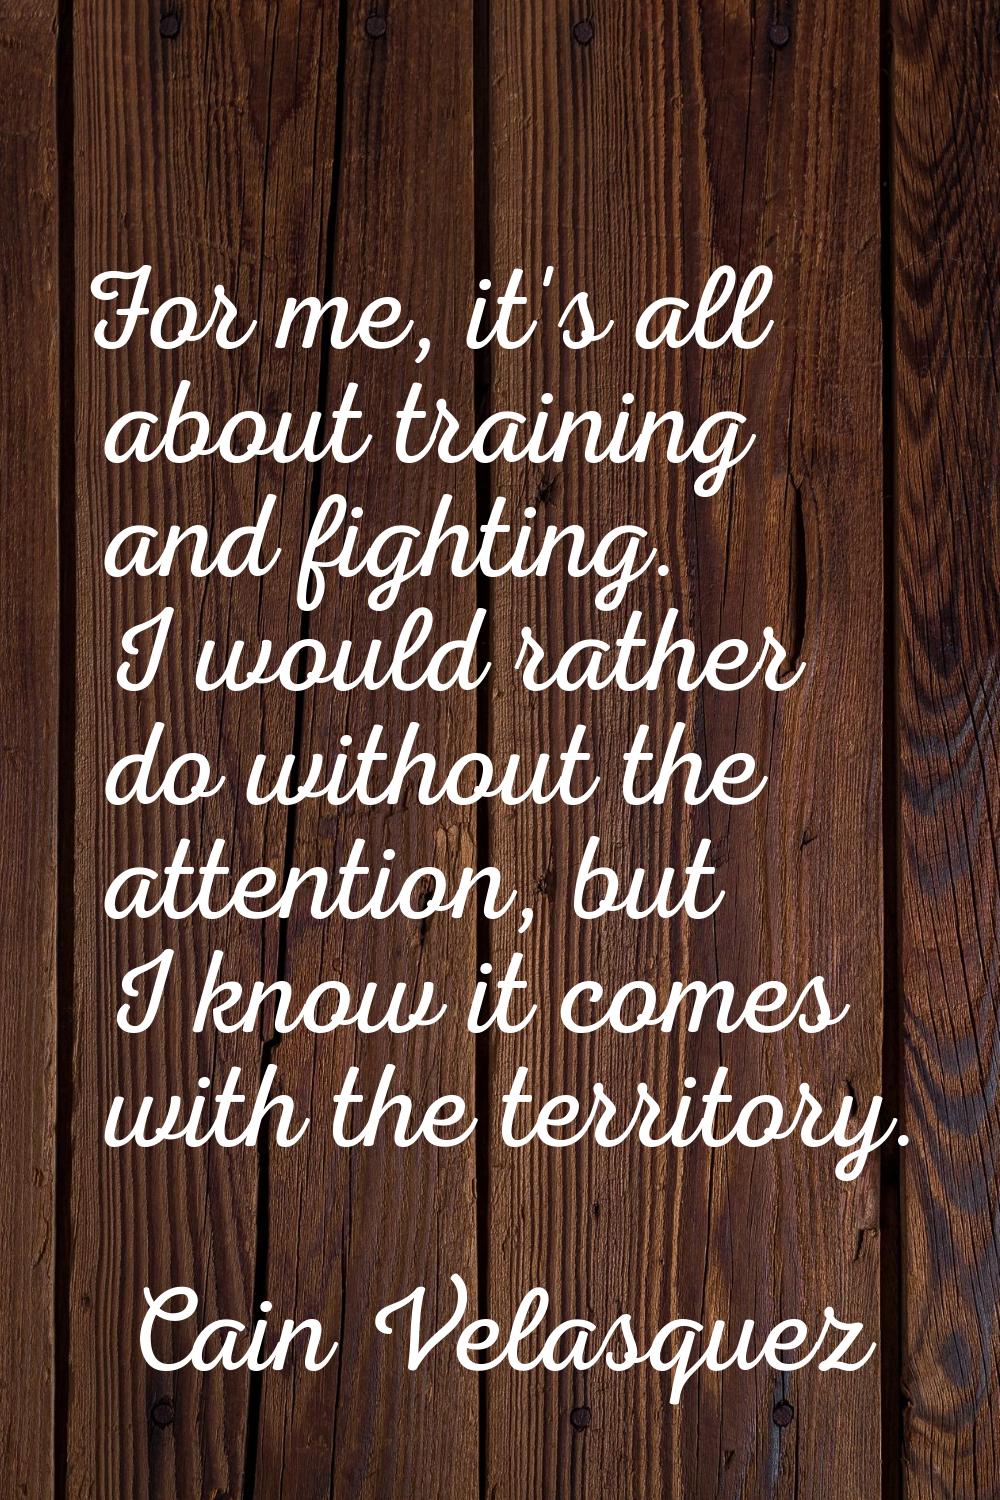 For me, it's all about training and fighting. I would rather do without the attention, but I know i